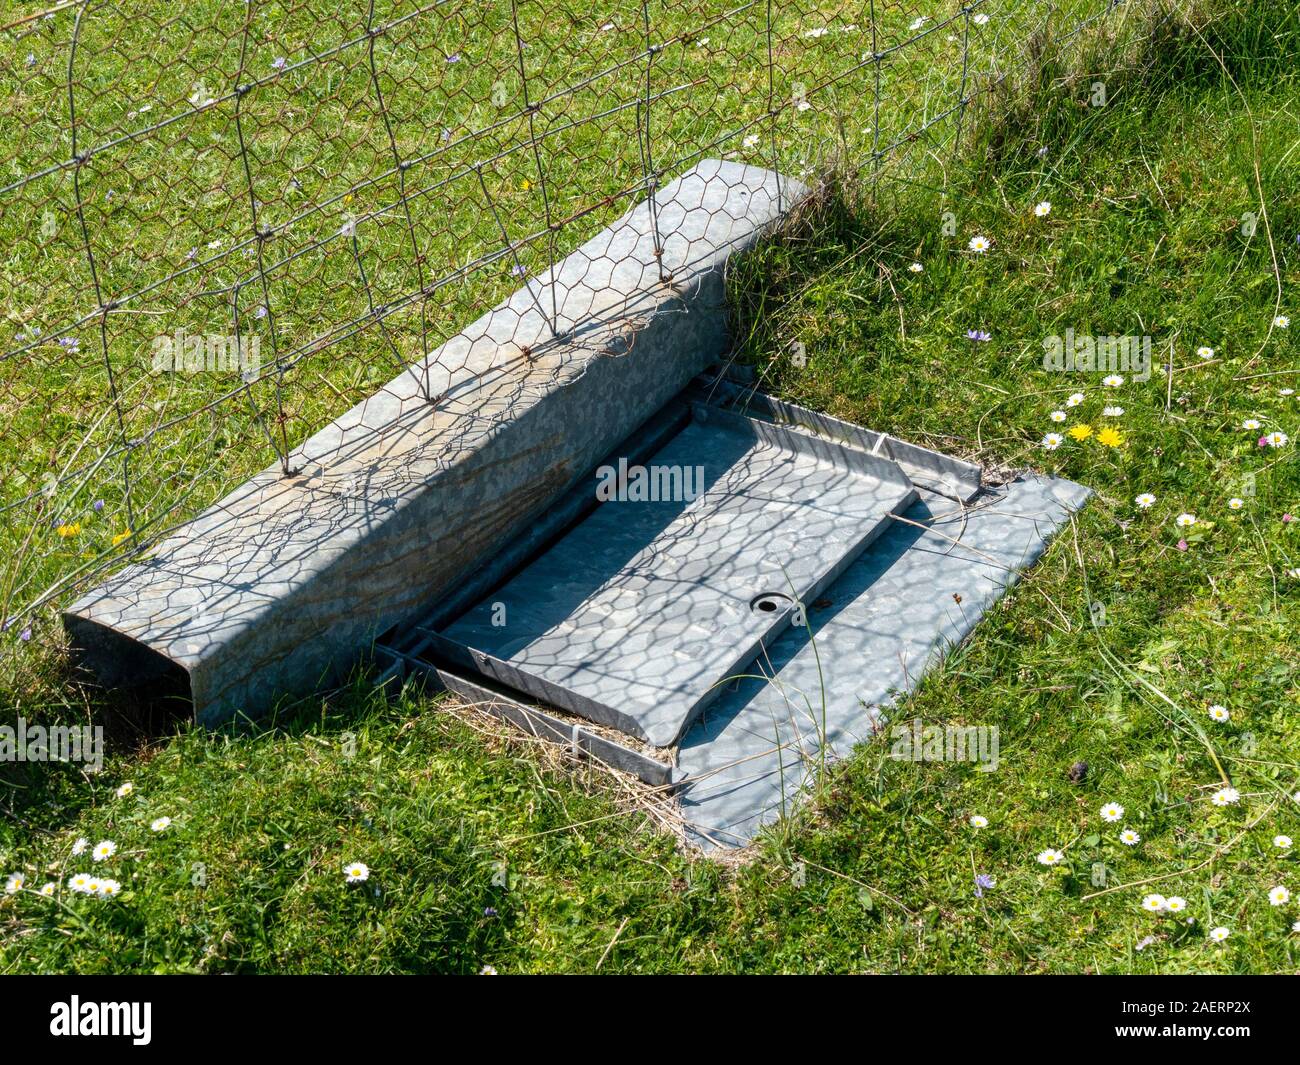 Small mammal / animal tunnel trap made by Leader in galvanised steel and set into fence for wildlife control or survey, Isle of Colonsay, Scotland, UK Stock Photo